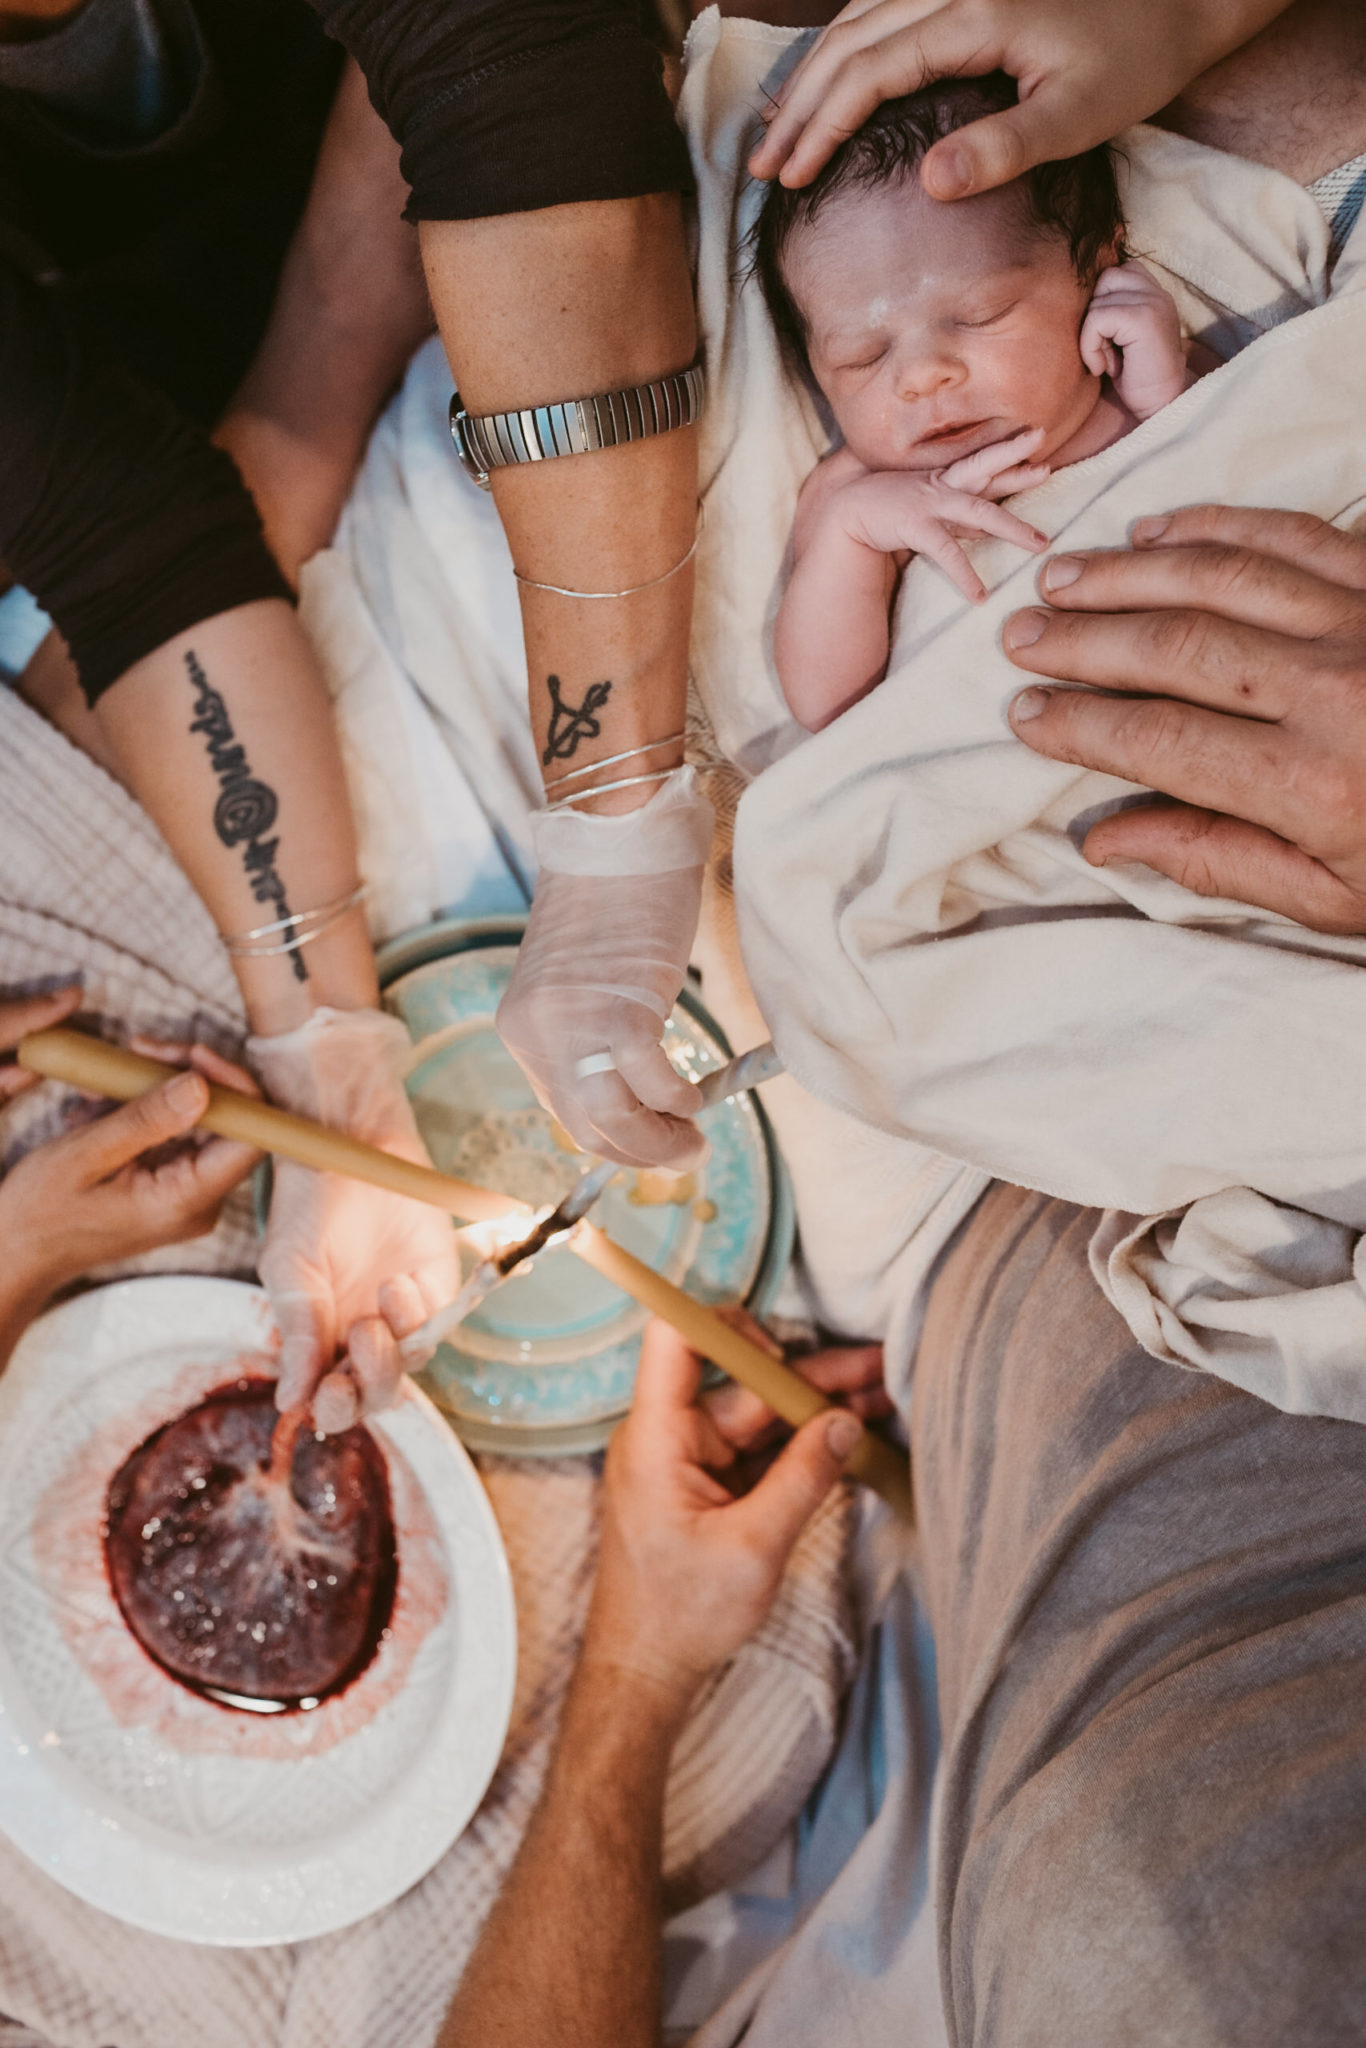 using candles to burn the cord after baby is born